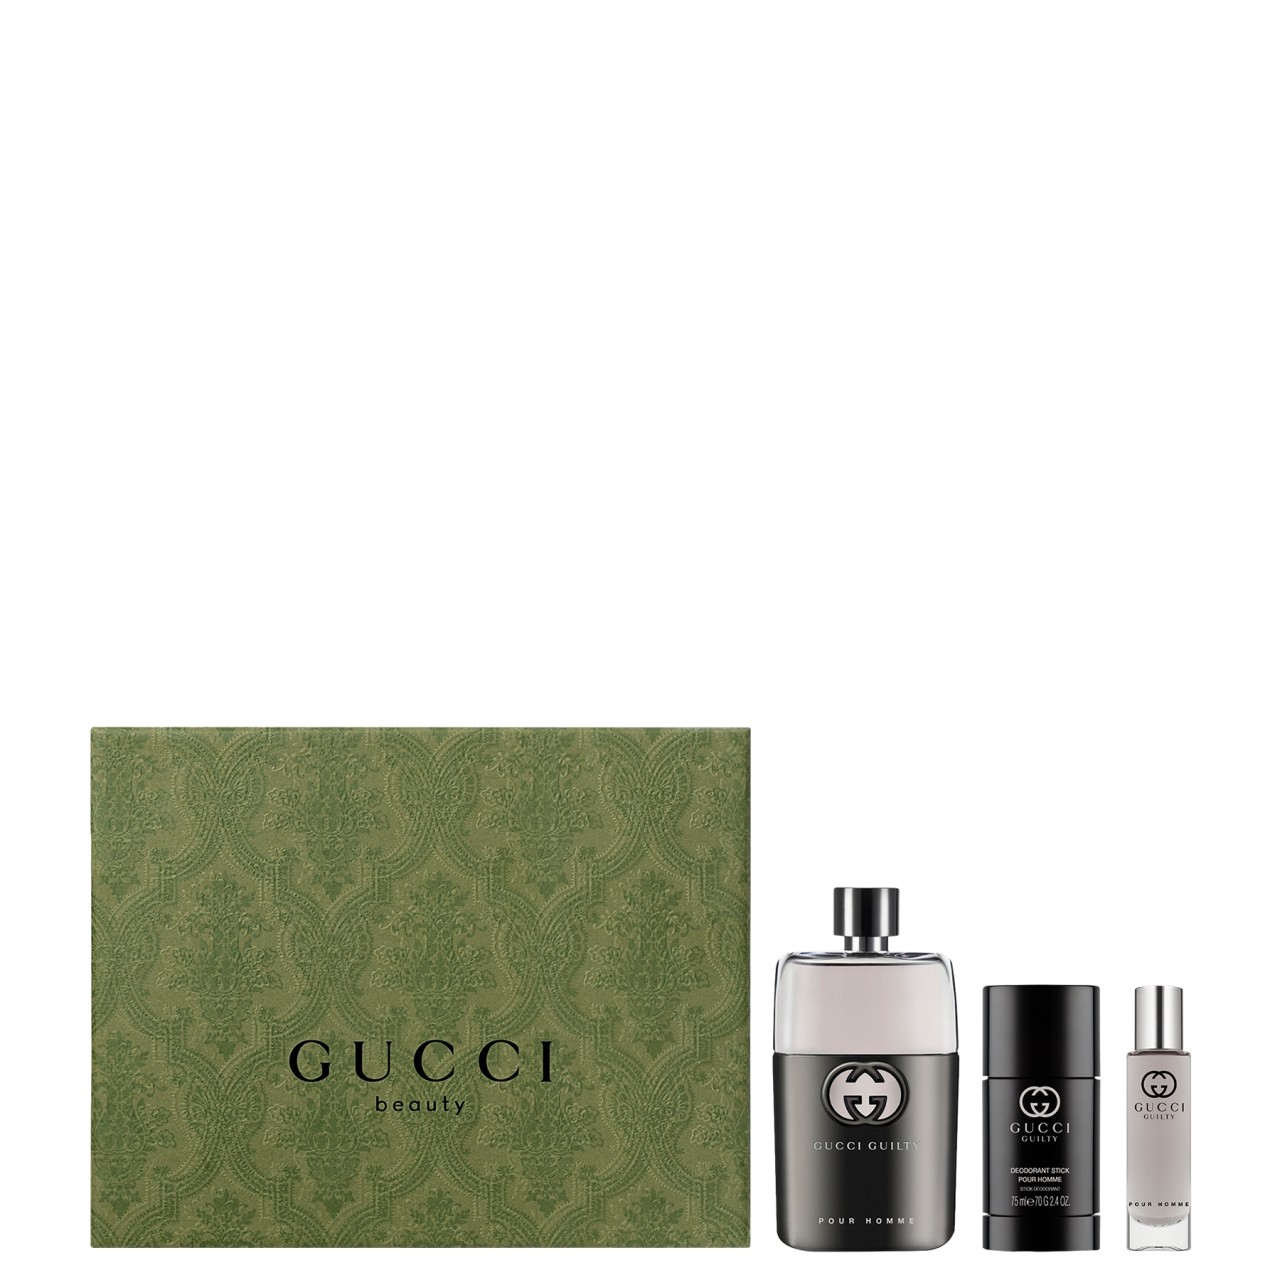 Gucci - Guilty Edt Spray 90 Ml Set - 